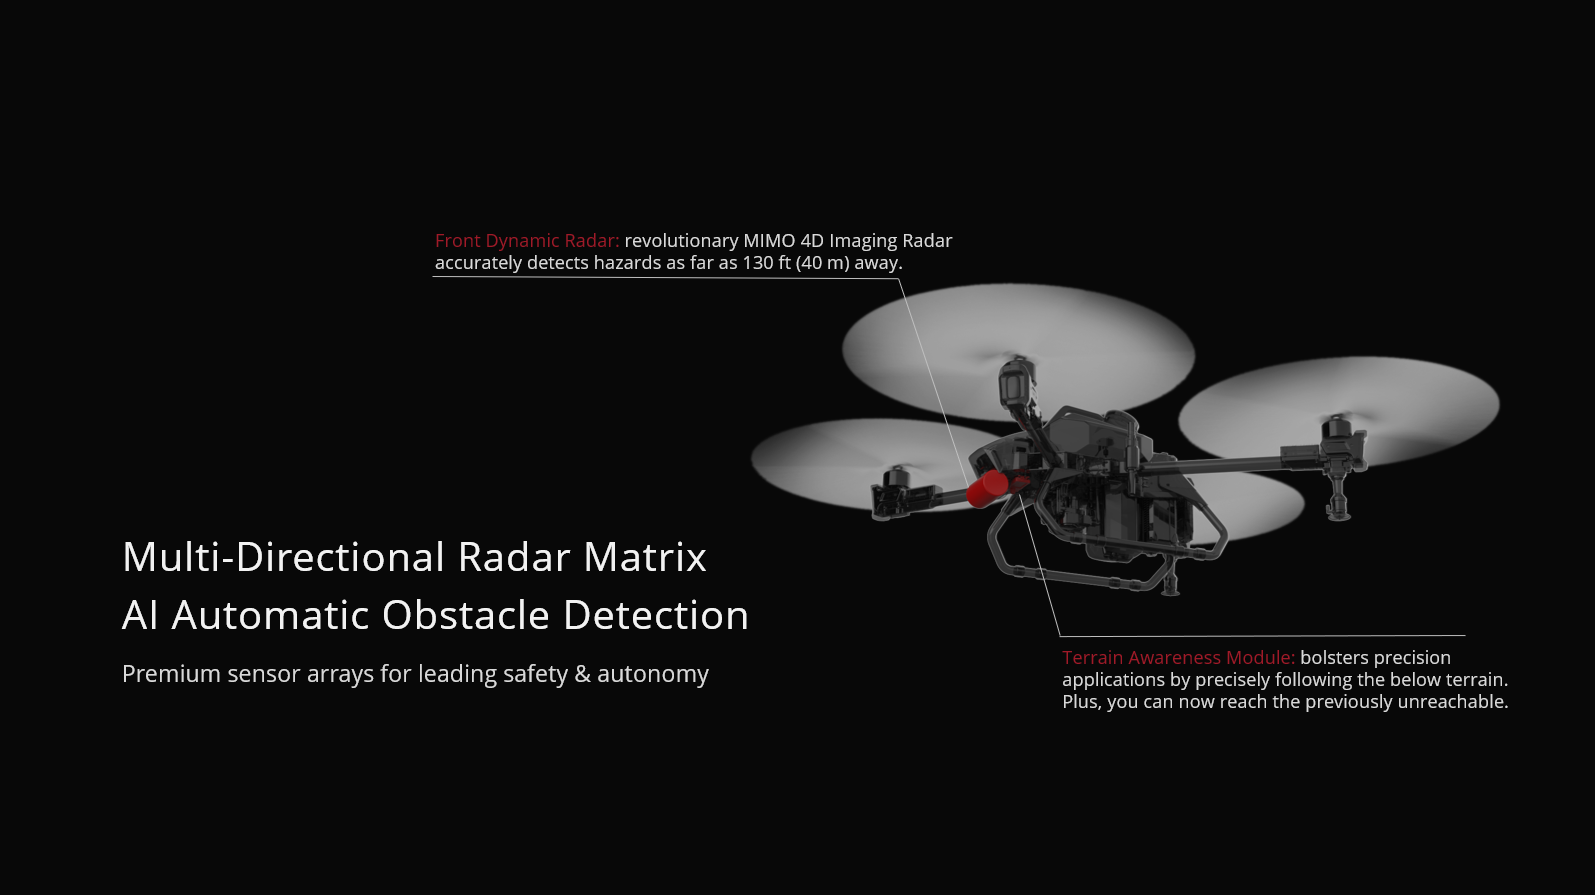 XAG V40 15L Agricultural Drone, MIMO 4D Imaging Radar accurately detects hazards as far as 130 ft (